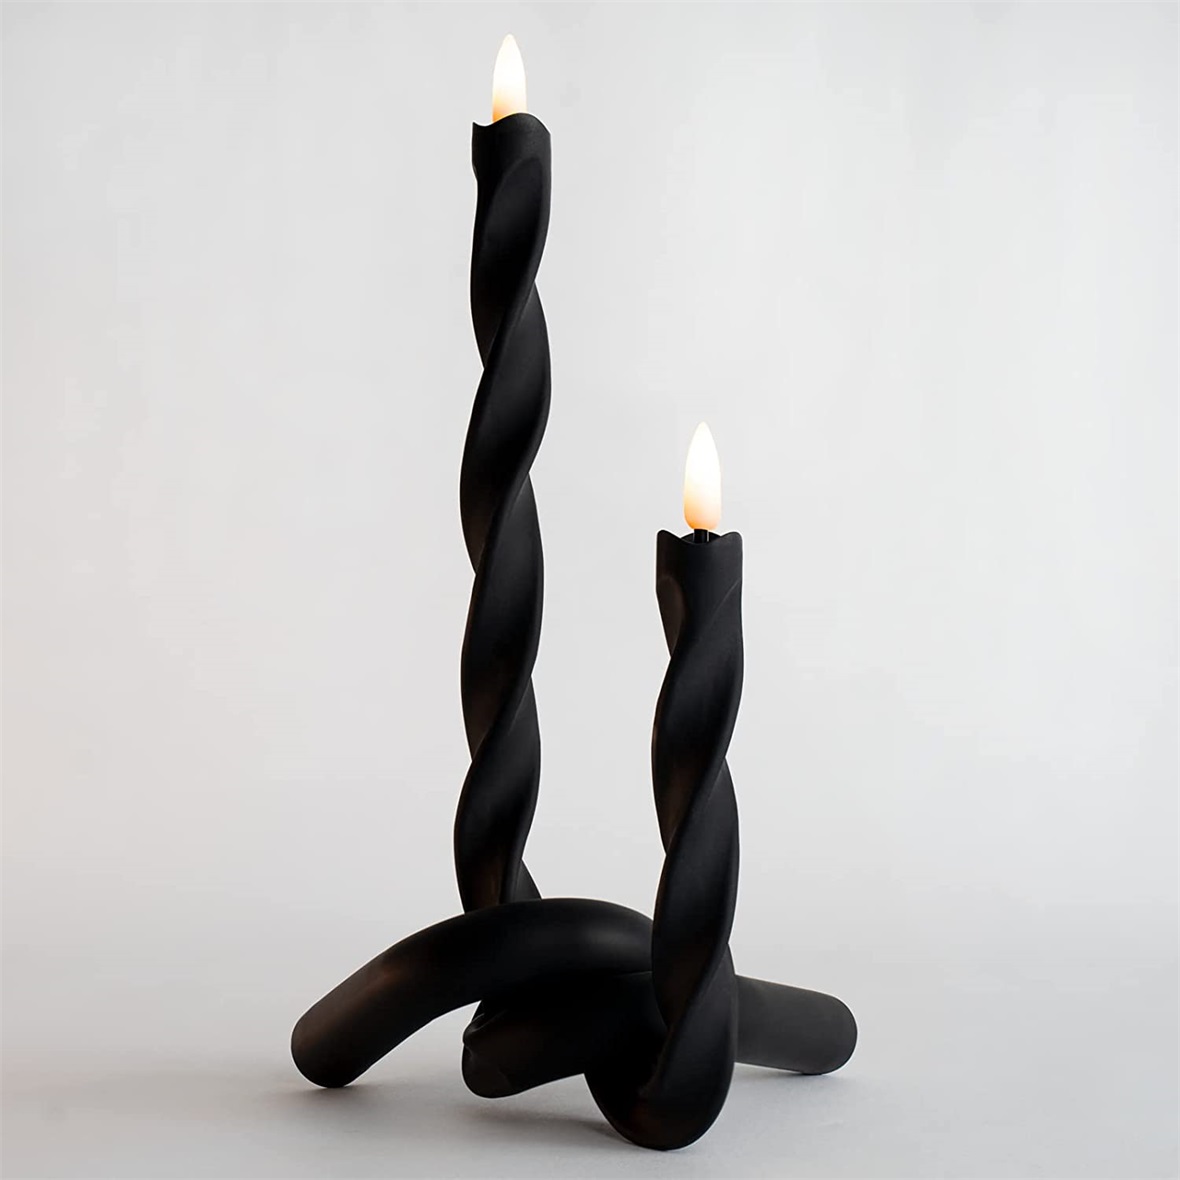 Yongmao Flameless Spiral Taper Candles Twisted Rechargeable LED Electric Fake Flickering Candles for Home Wedding Party Christmas Decoration (2Pcs, Black)